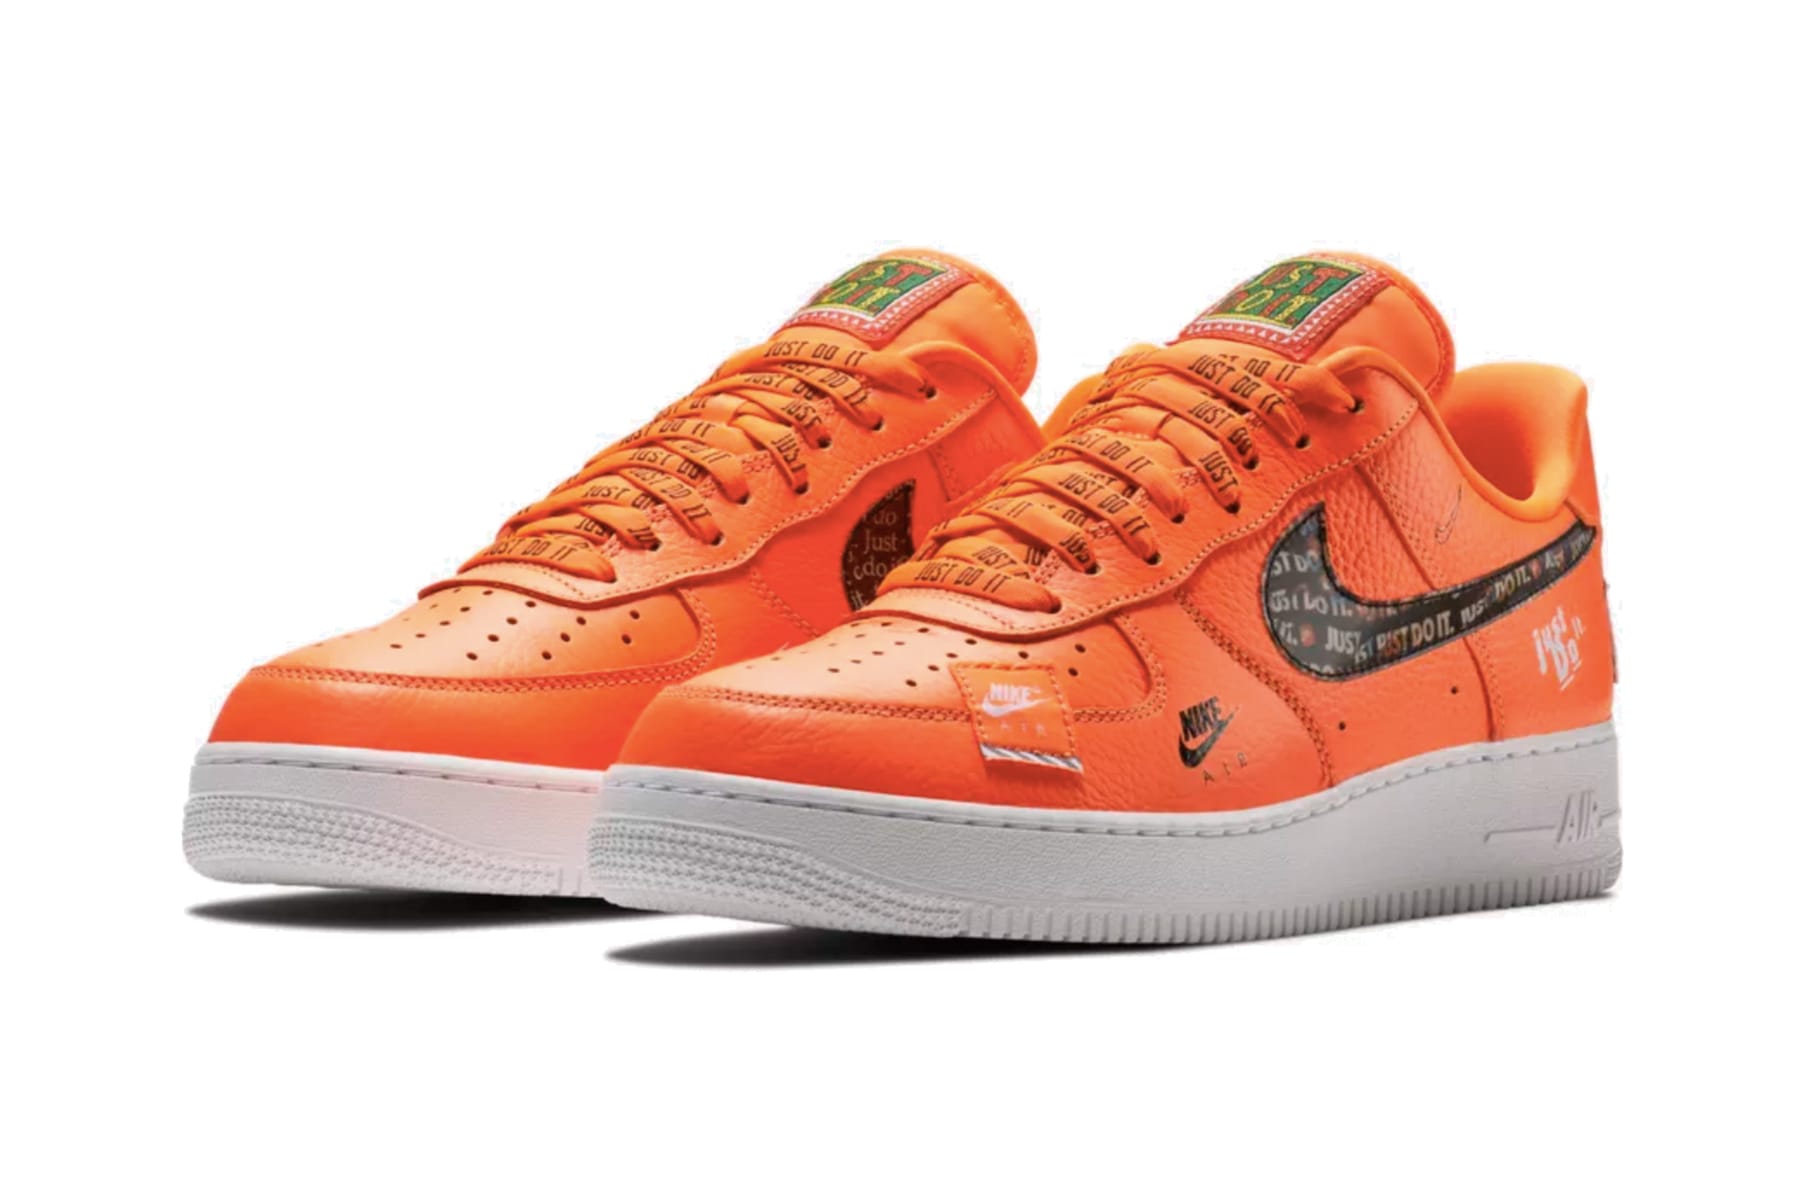 nike air force one low just do it